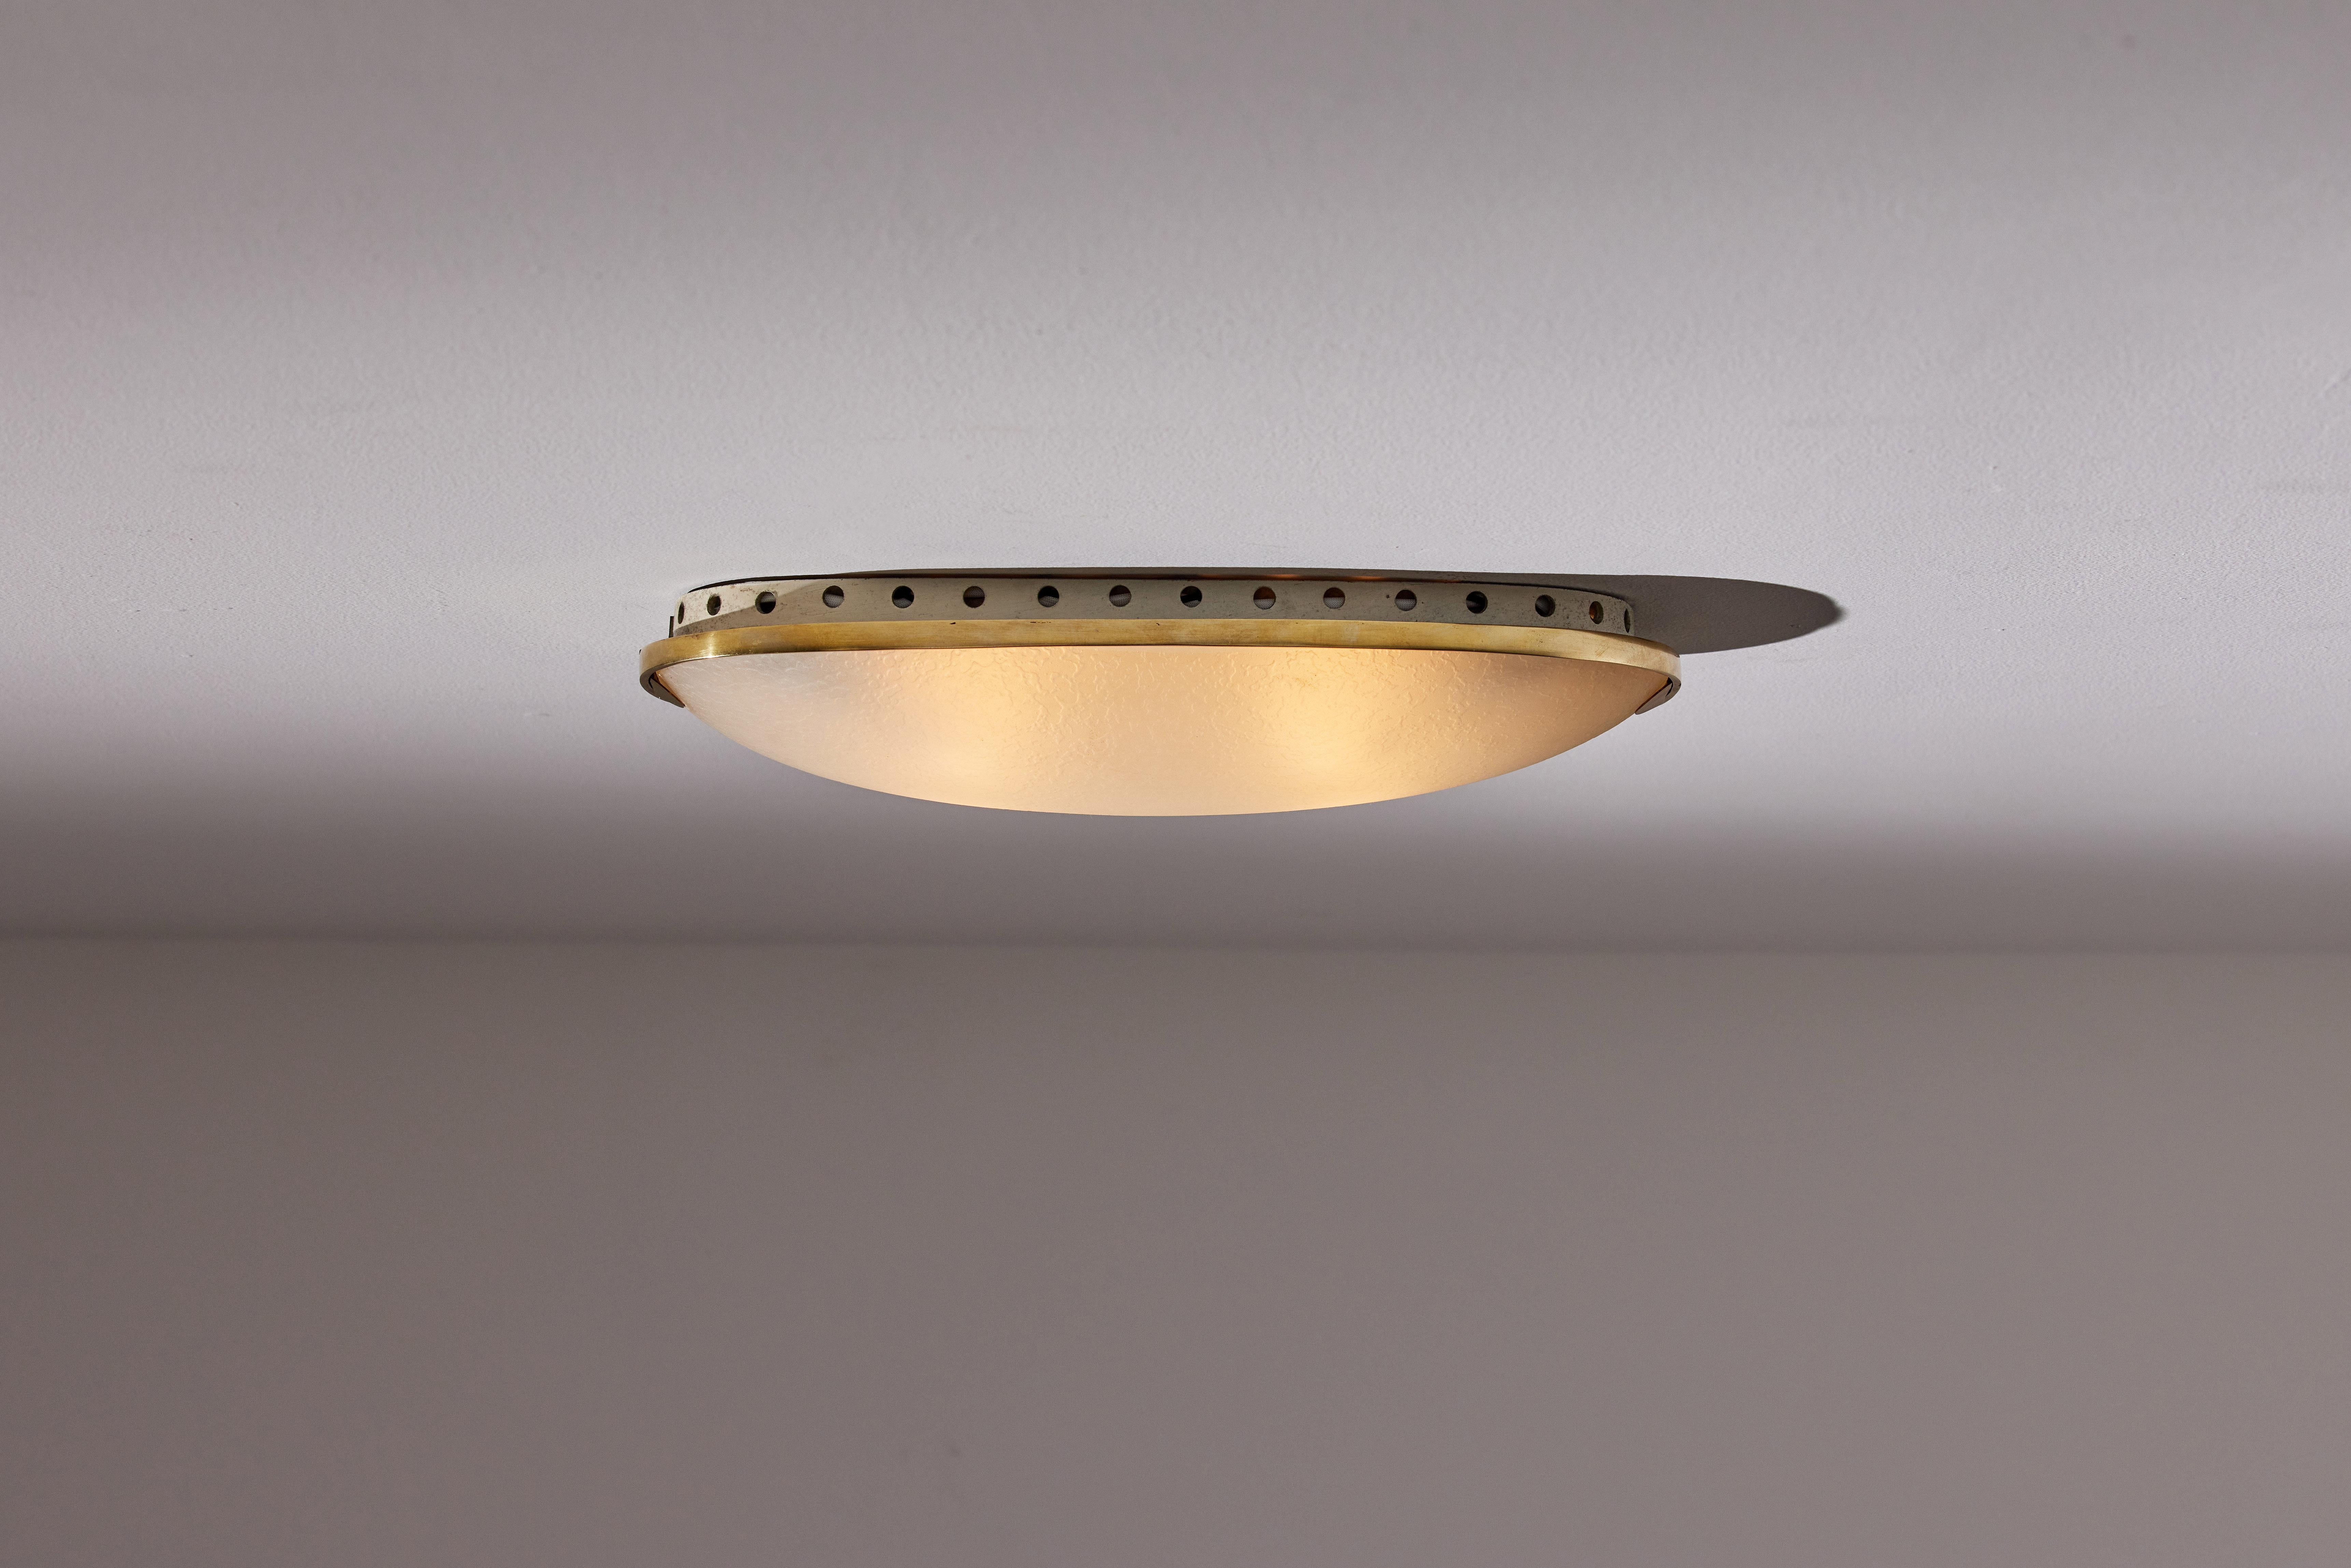 Flush mount wall/ceiling light by Fontana Arte. Manufactured in Italy, circa 1950's. Textured glass, brass. Rewired for U.S. standards. We recommend four E26 25w maximum bulbs. Bulbs provided as a one time courtesy. Height indicated is from ceiling